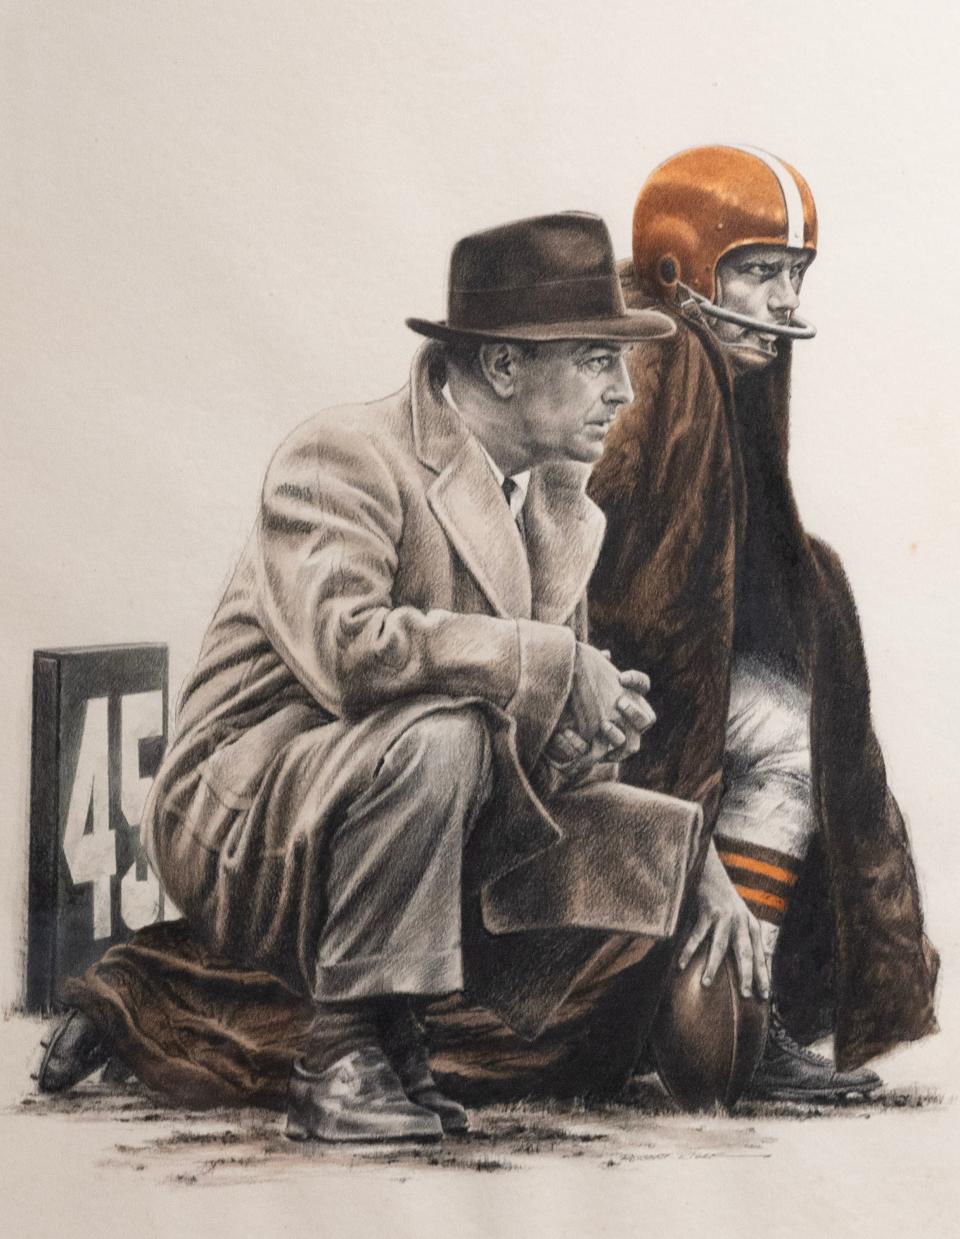 Based off an original photograph, this illustration of Paul Brown was the cover of the Oct. 8, 1956, edition of Sports Illustrated.